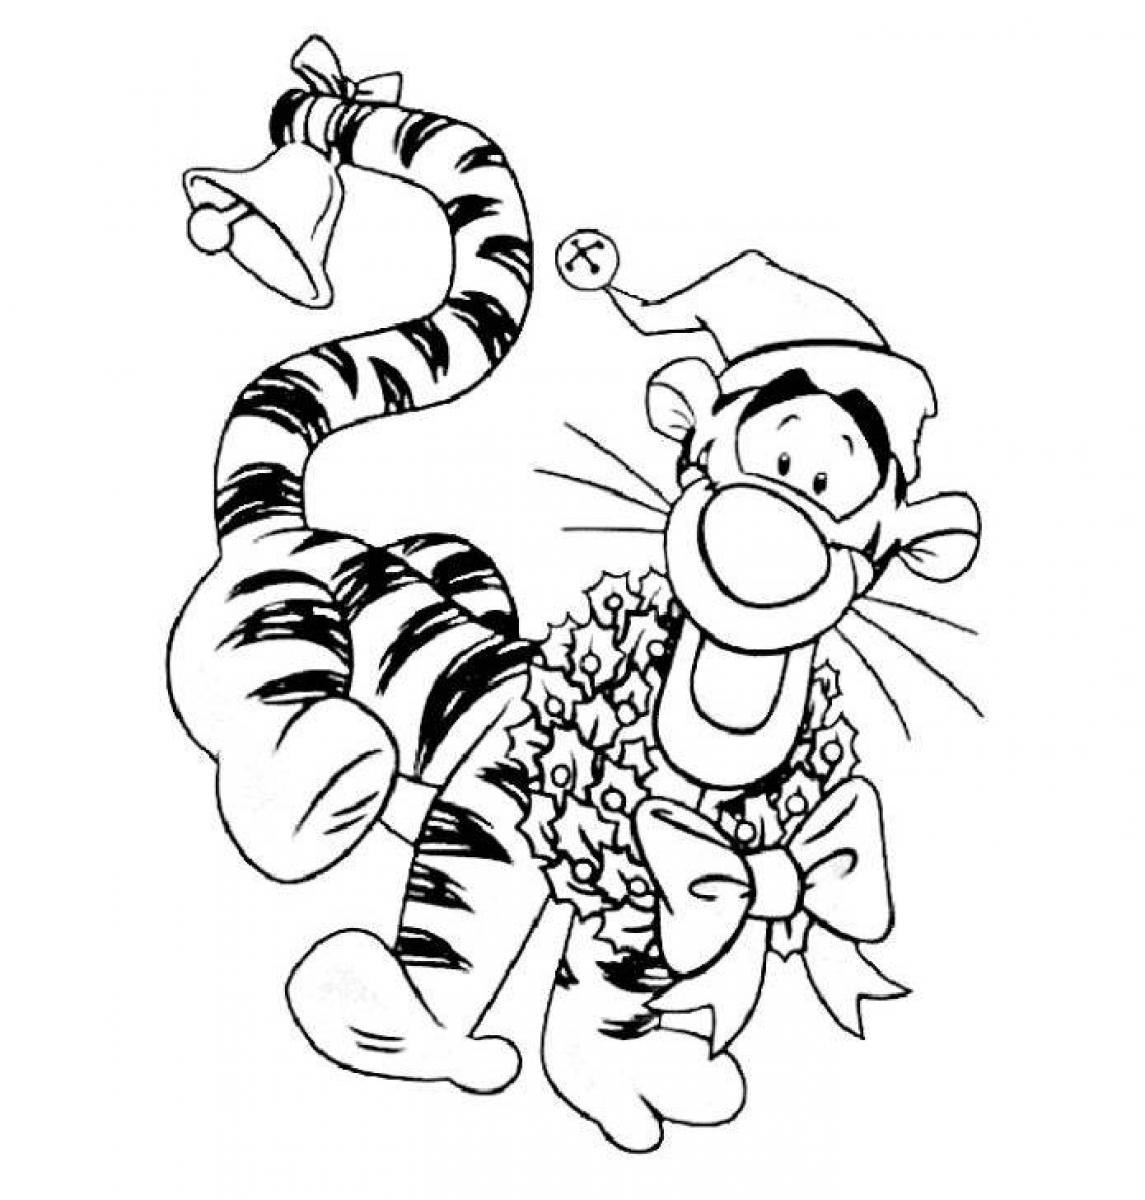 Boys Christmas Coloring Pages
 Free Rowdyruff Boys Coloring Pages Download Free Clip Art